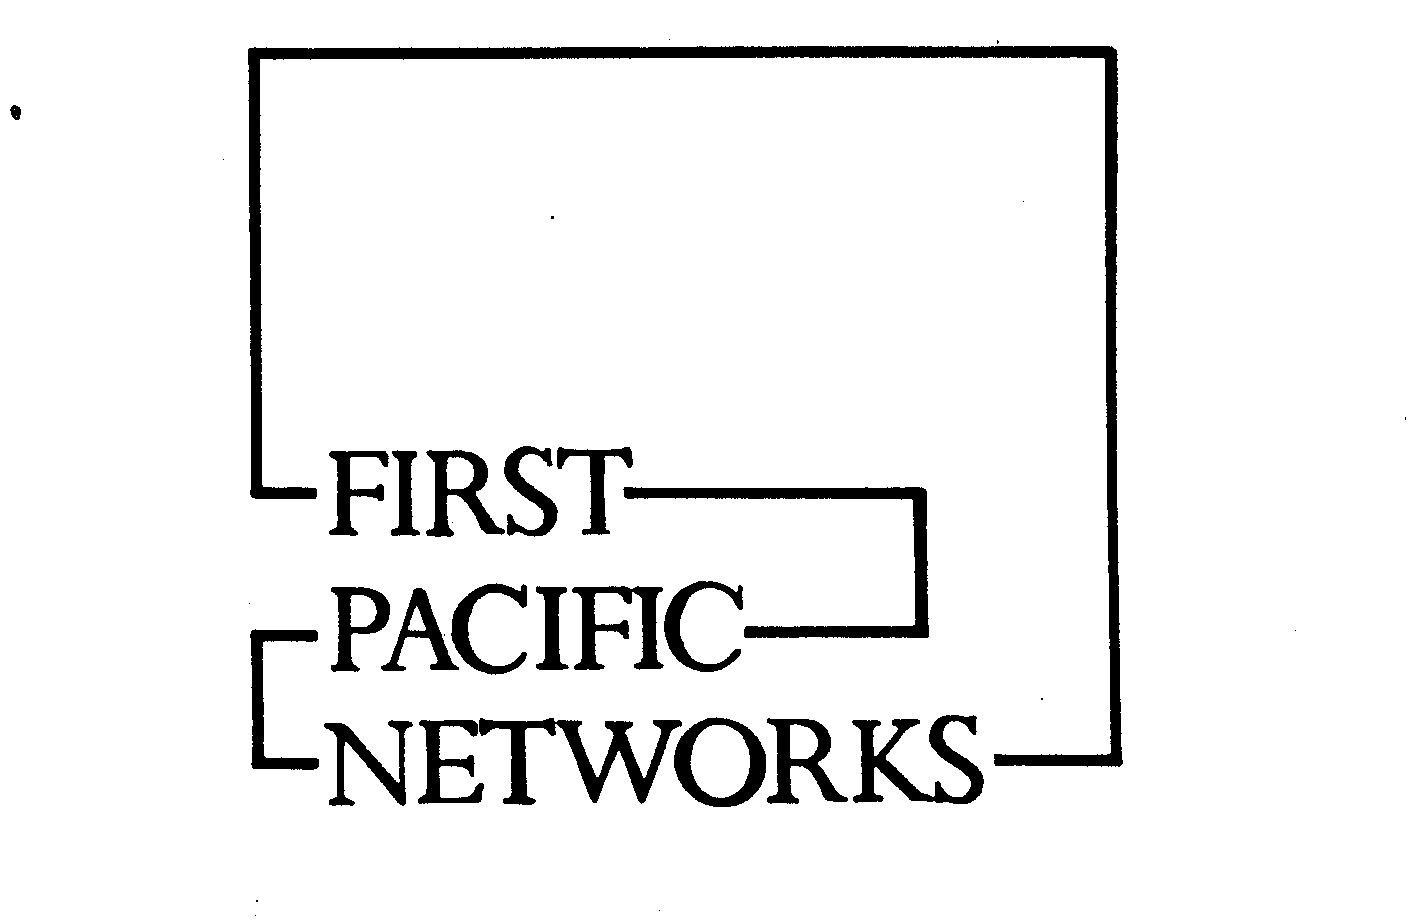  FIRST PACIFIC NETWORKS